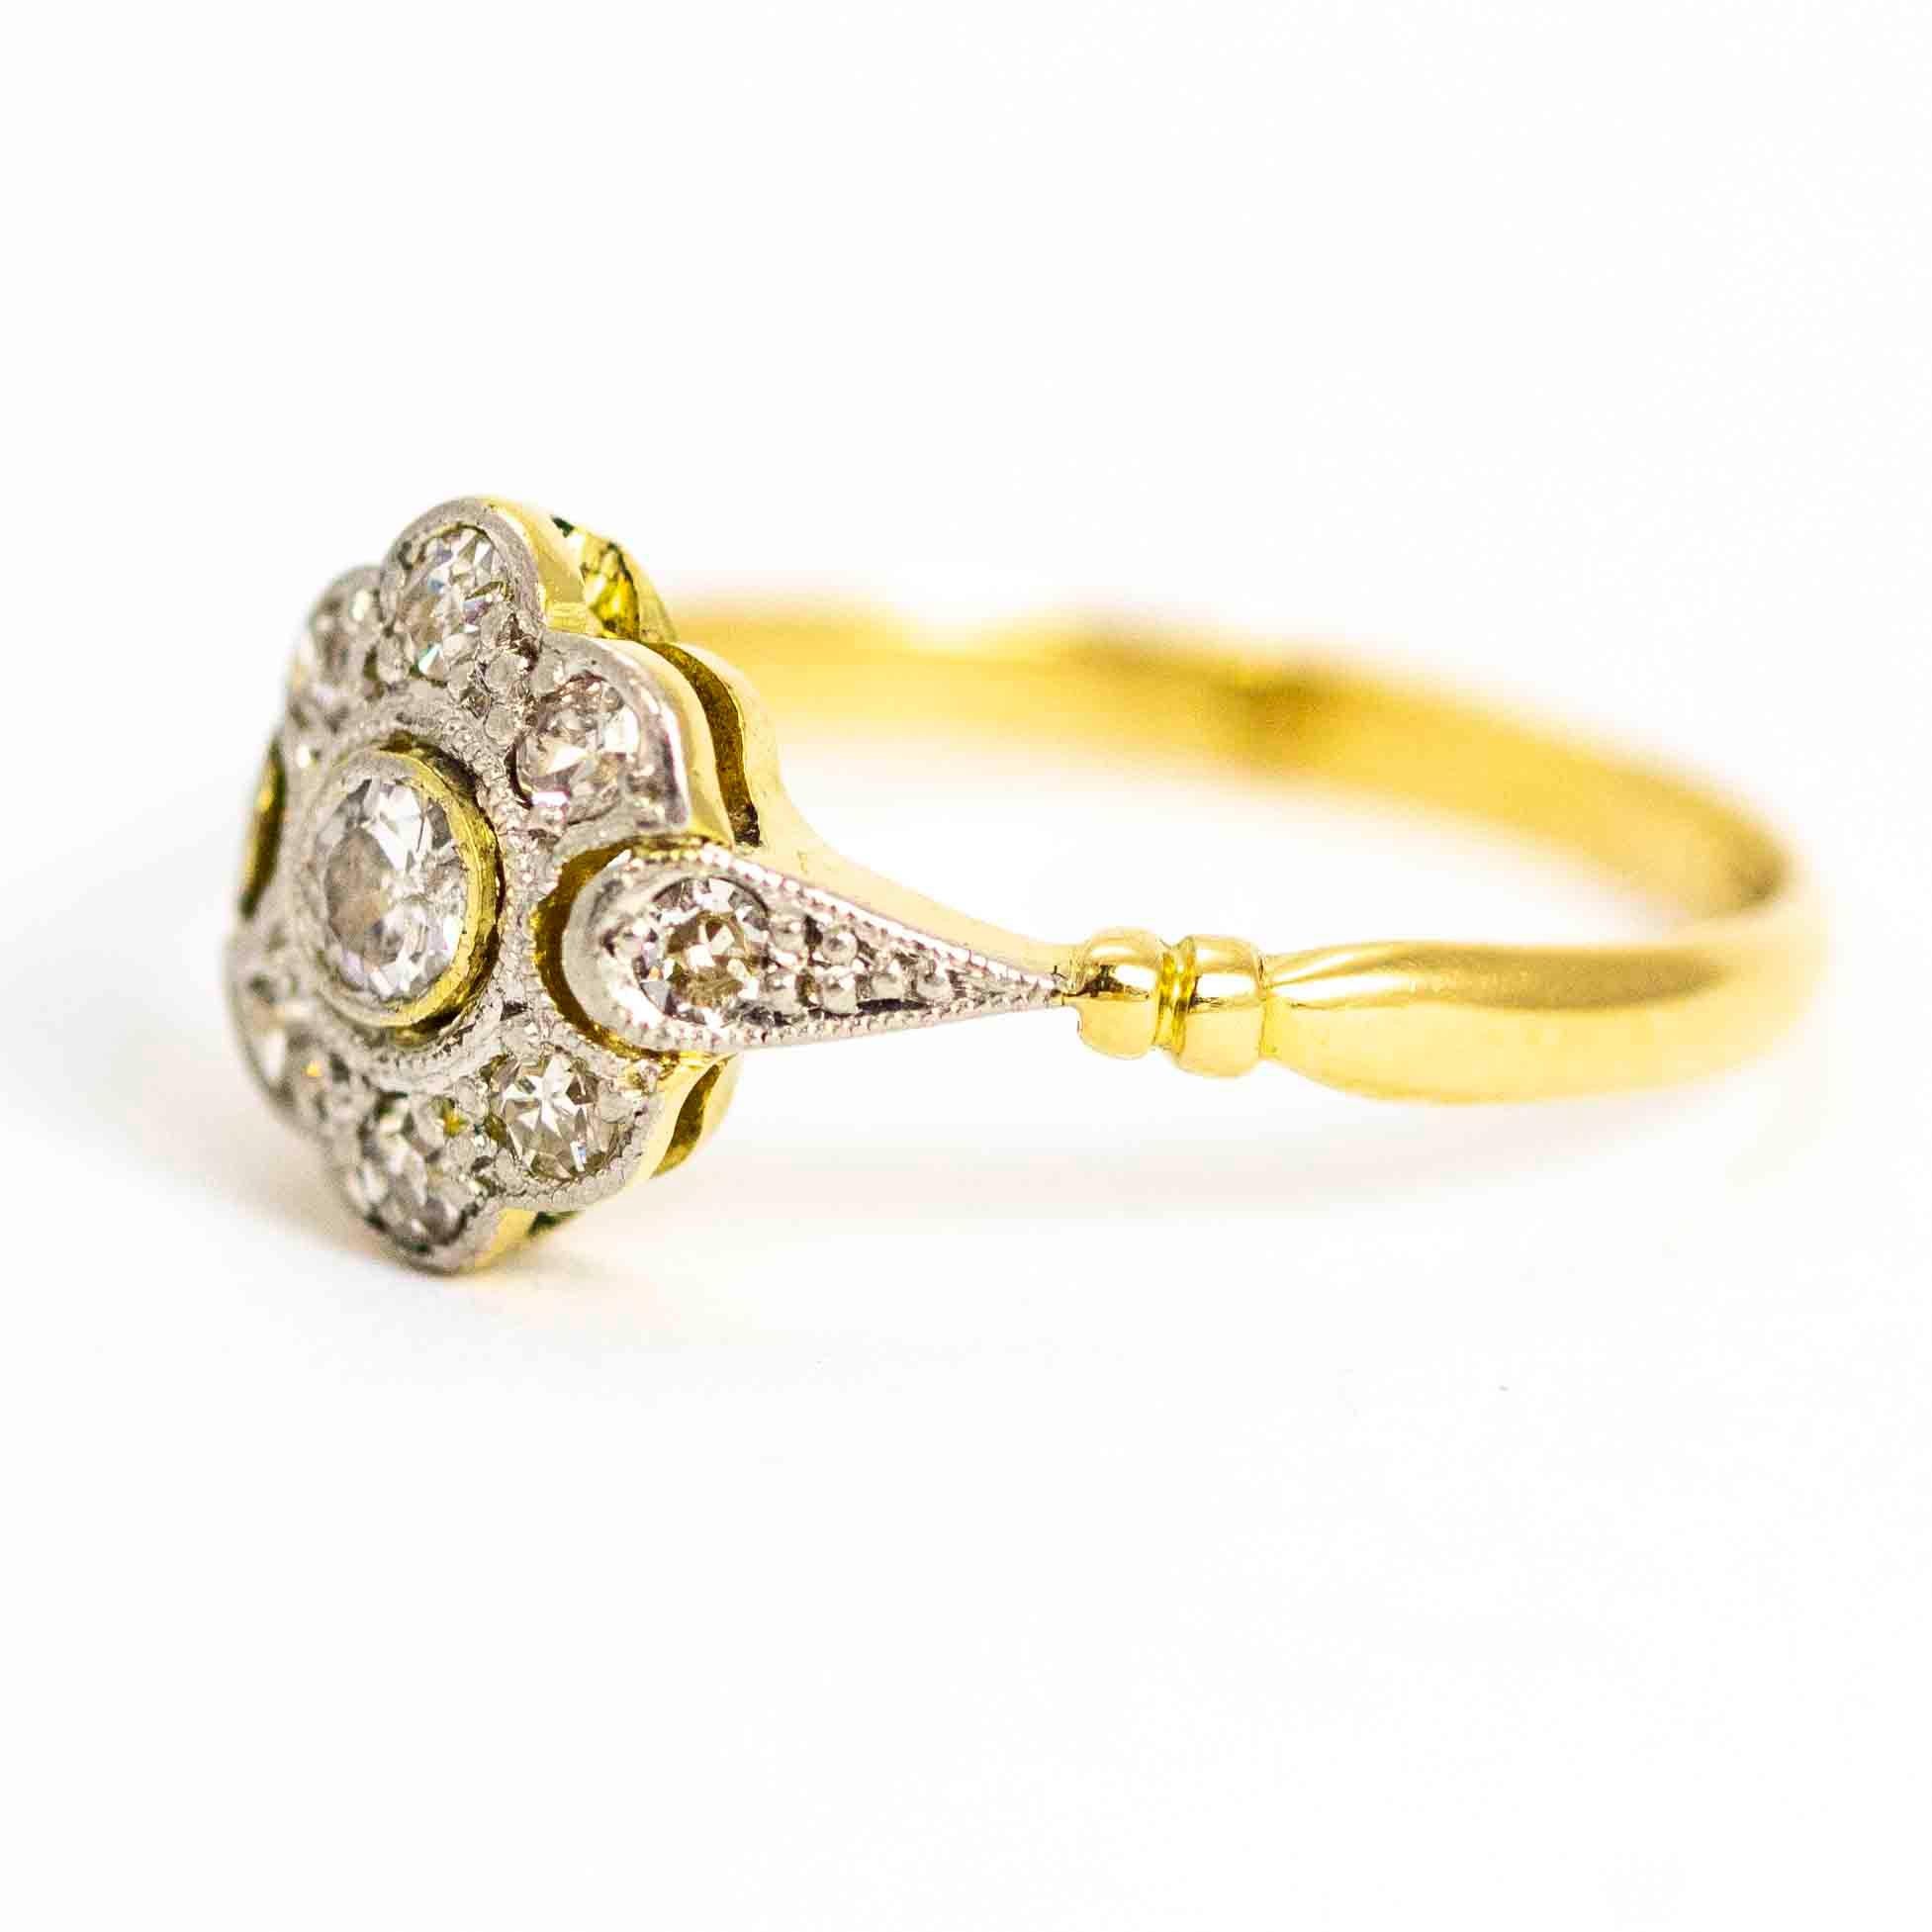 An exquisite Art Deco cluster ring. The cluster is beautifully designed in platinum to complement the white diamonds. The central old European cut stone measures approximately 10 points. This sits between the elegant teardrop shoulders which are